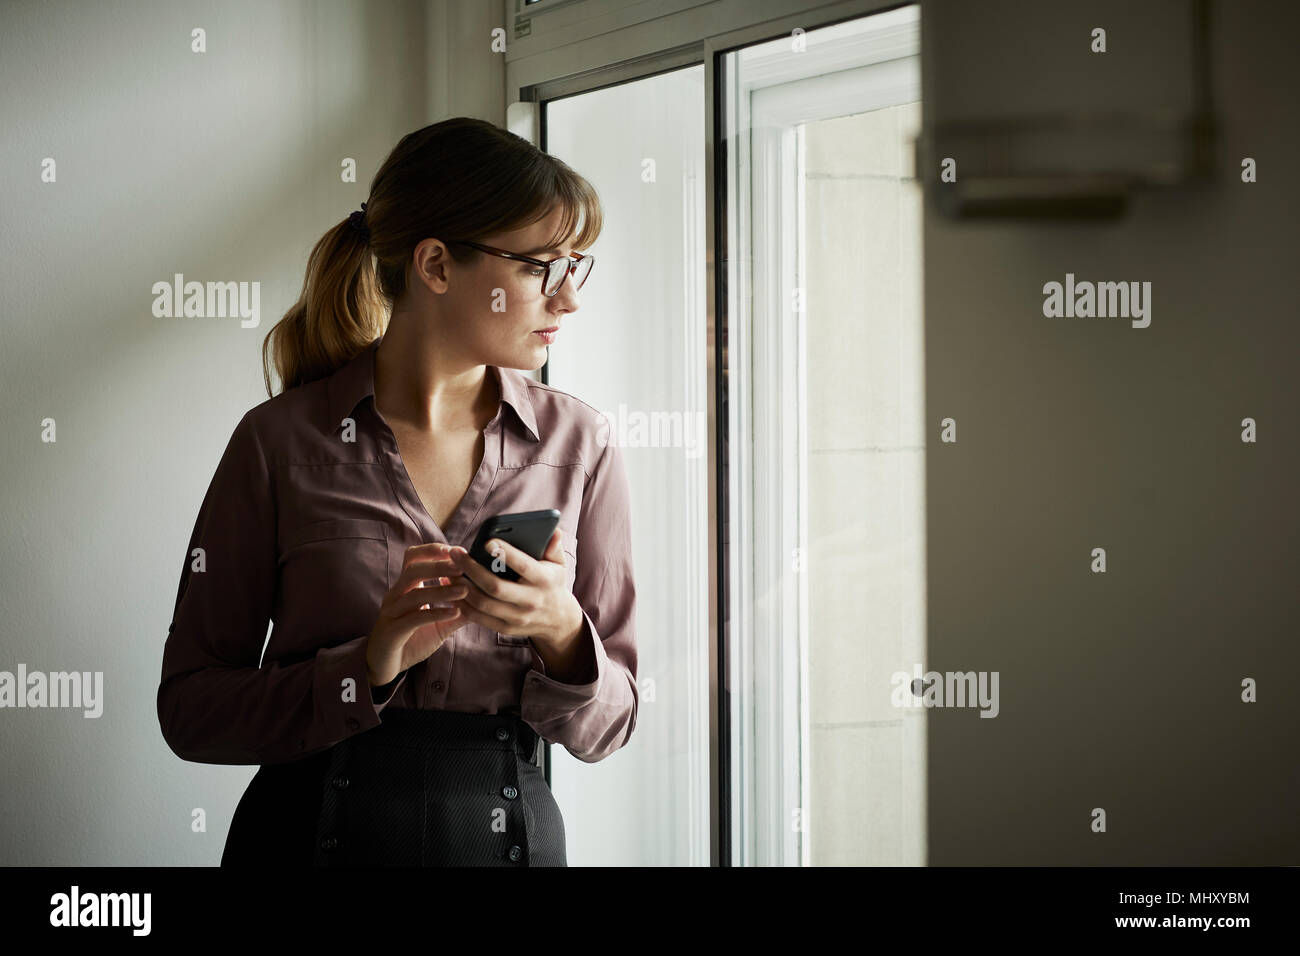 Businesswoman looking out of window pensively Stock Photo